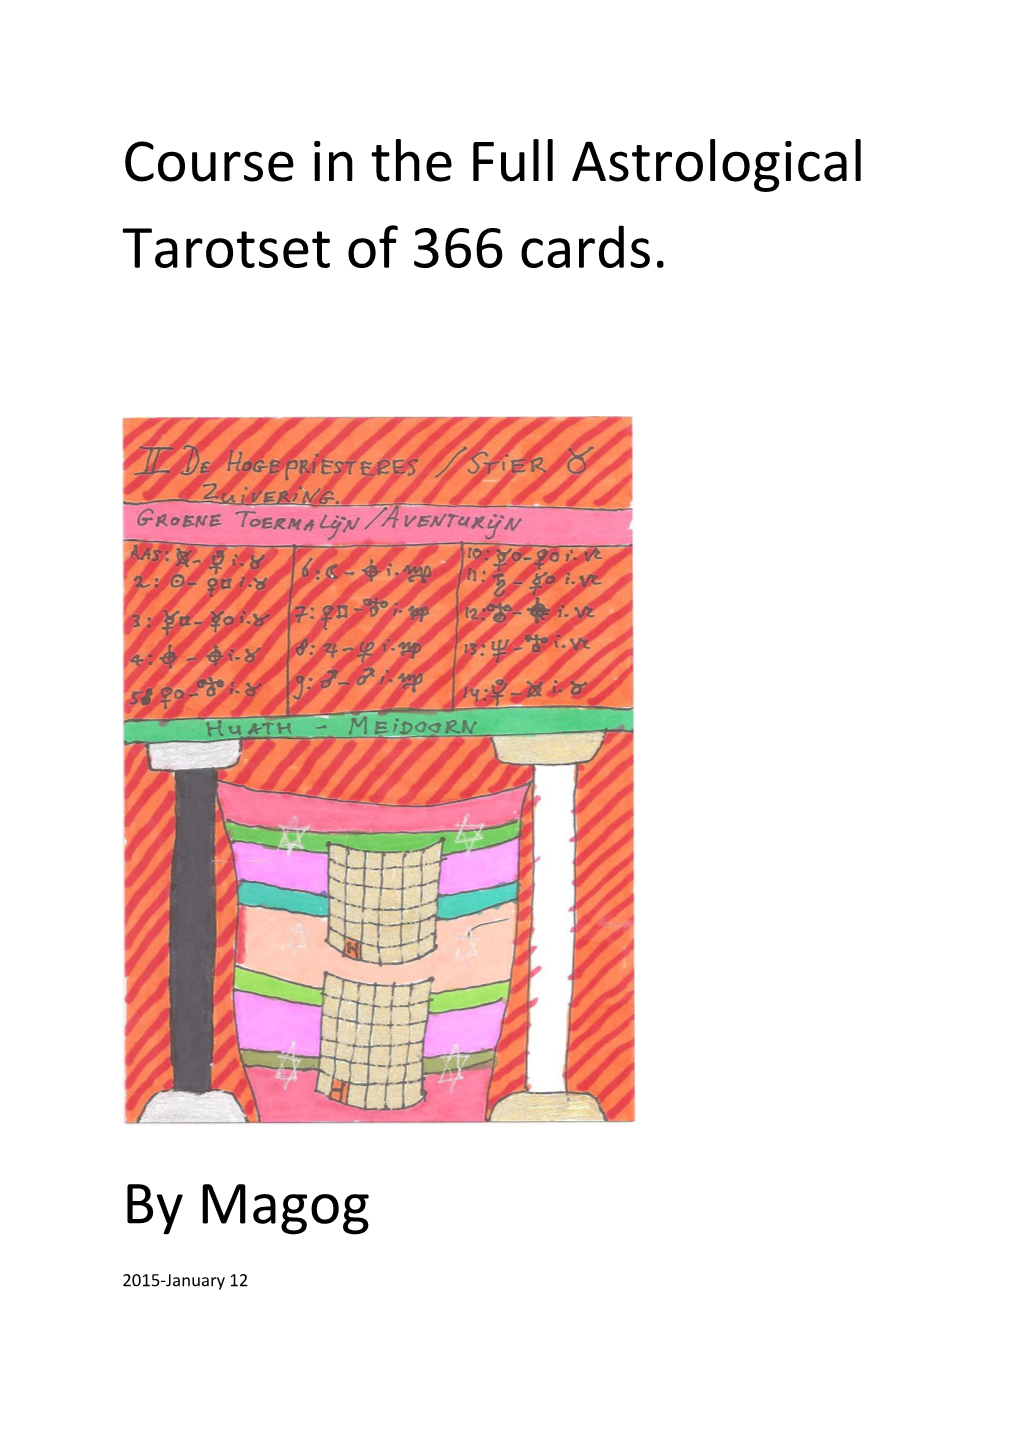 Course in the Full Astrological Tarotset of 366 Cards